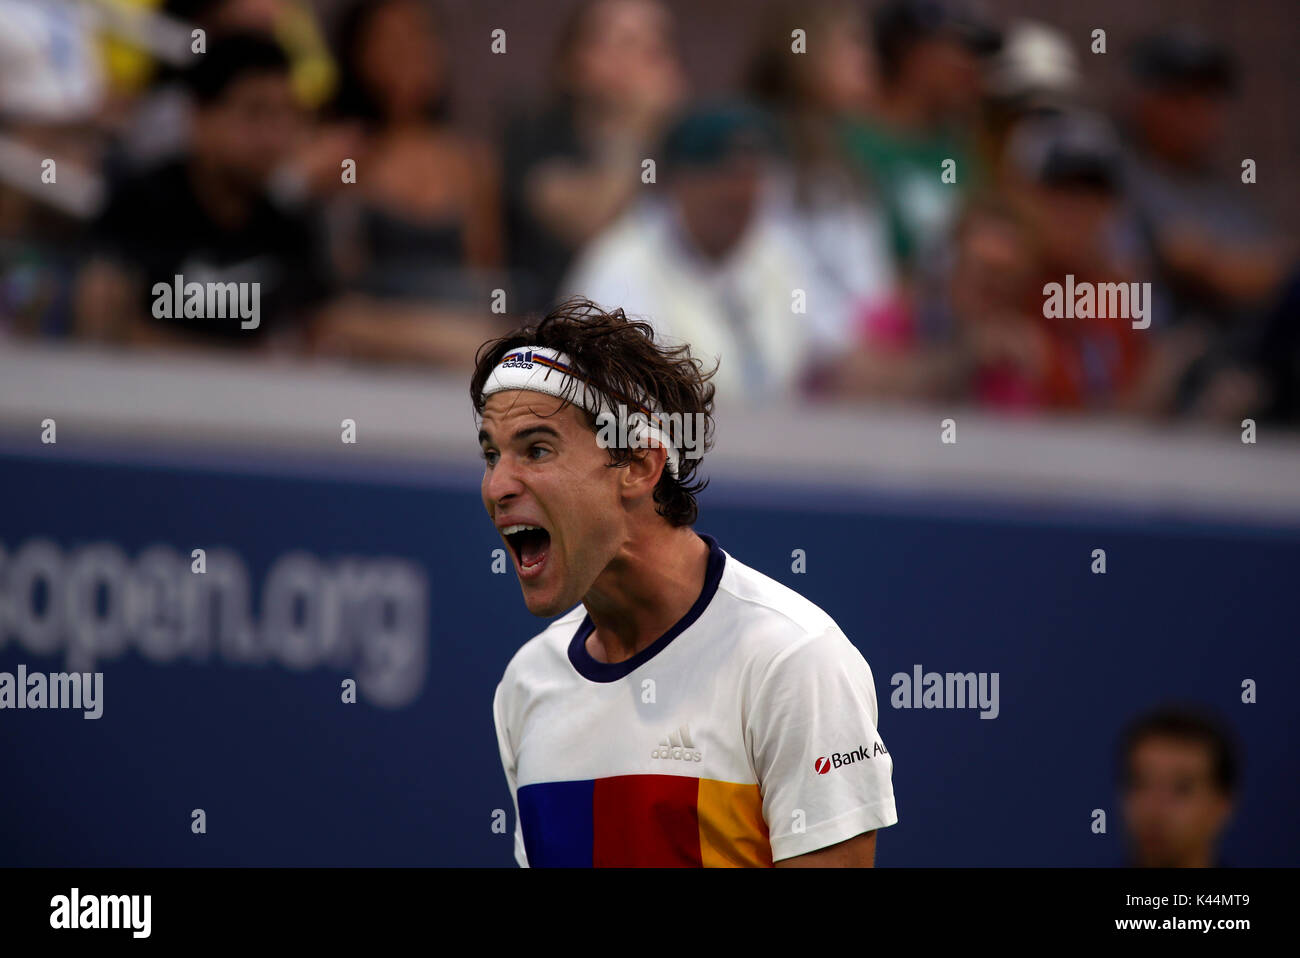 Flushing Meadows, New York, USA. 4th Sep, 2017. US Open Tennis: Number 6 seeded Dominic Thiem of Austria reacts to a point during his fourth round match against Juan Martin del Potro of Argentina at the US Open in Flushing Meadows, New York. del Potro won the match in five sets to advance to the quarterfinals. Credit: Adam Stoltman/Alamy Live News Stock Photo